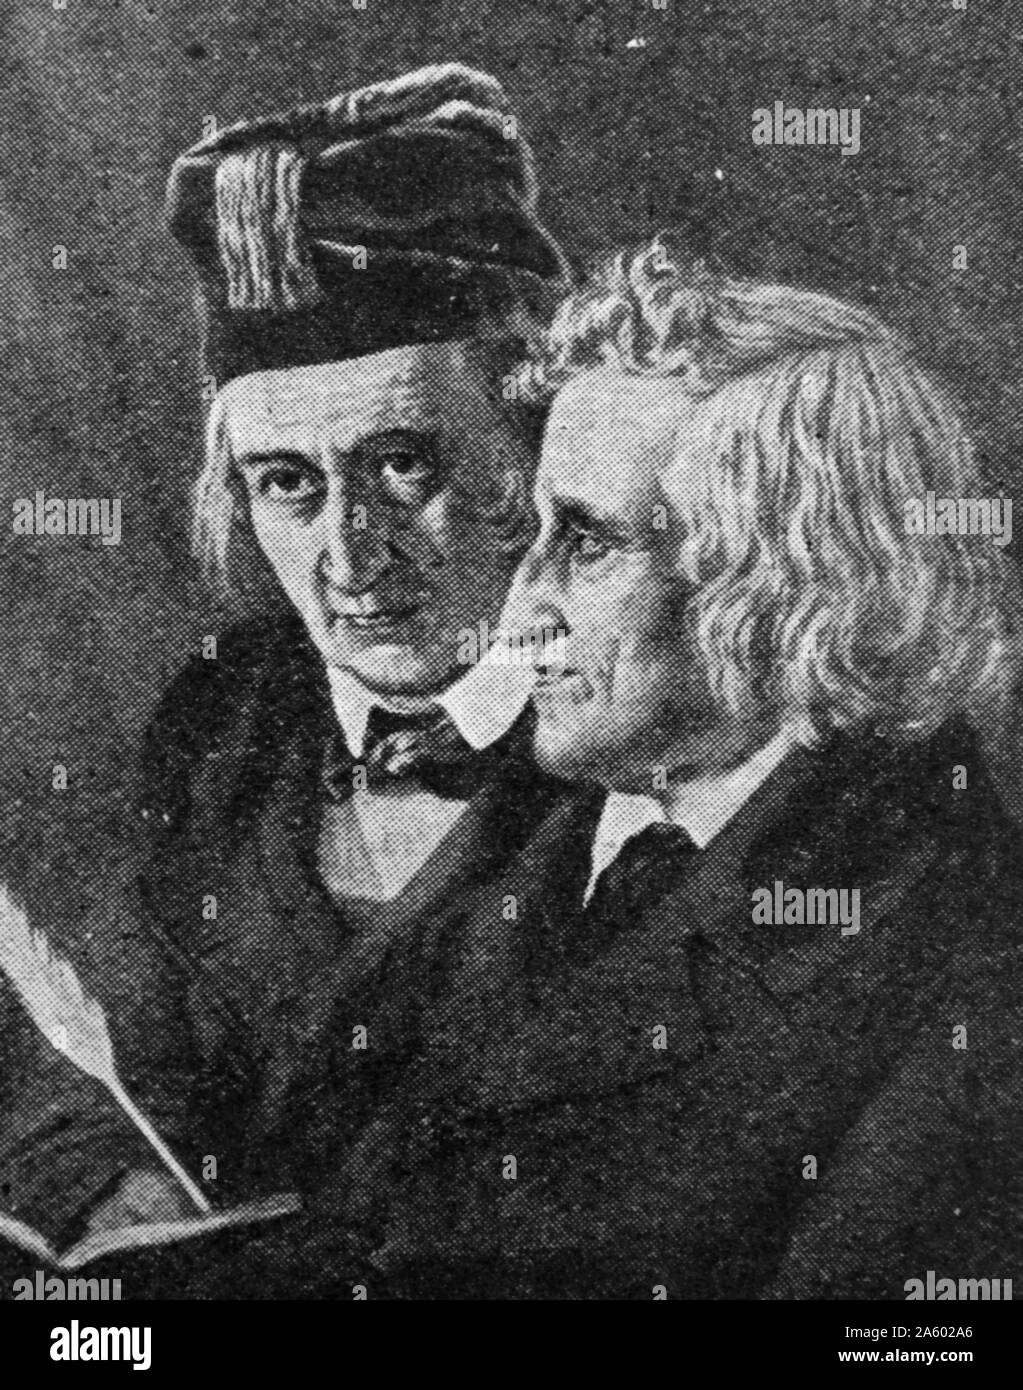 The Brothers Grimm. Jakob and Wilhelm, two educationists of Gottingen. They were among the professors dismissed in 1837 for protesting against the absolution of state officials from their oaths of fidelity to the constitution. Stock Photo